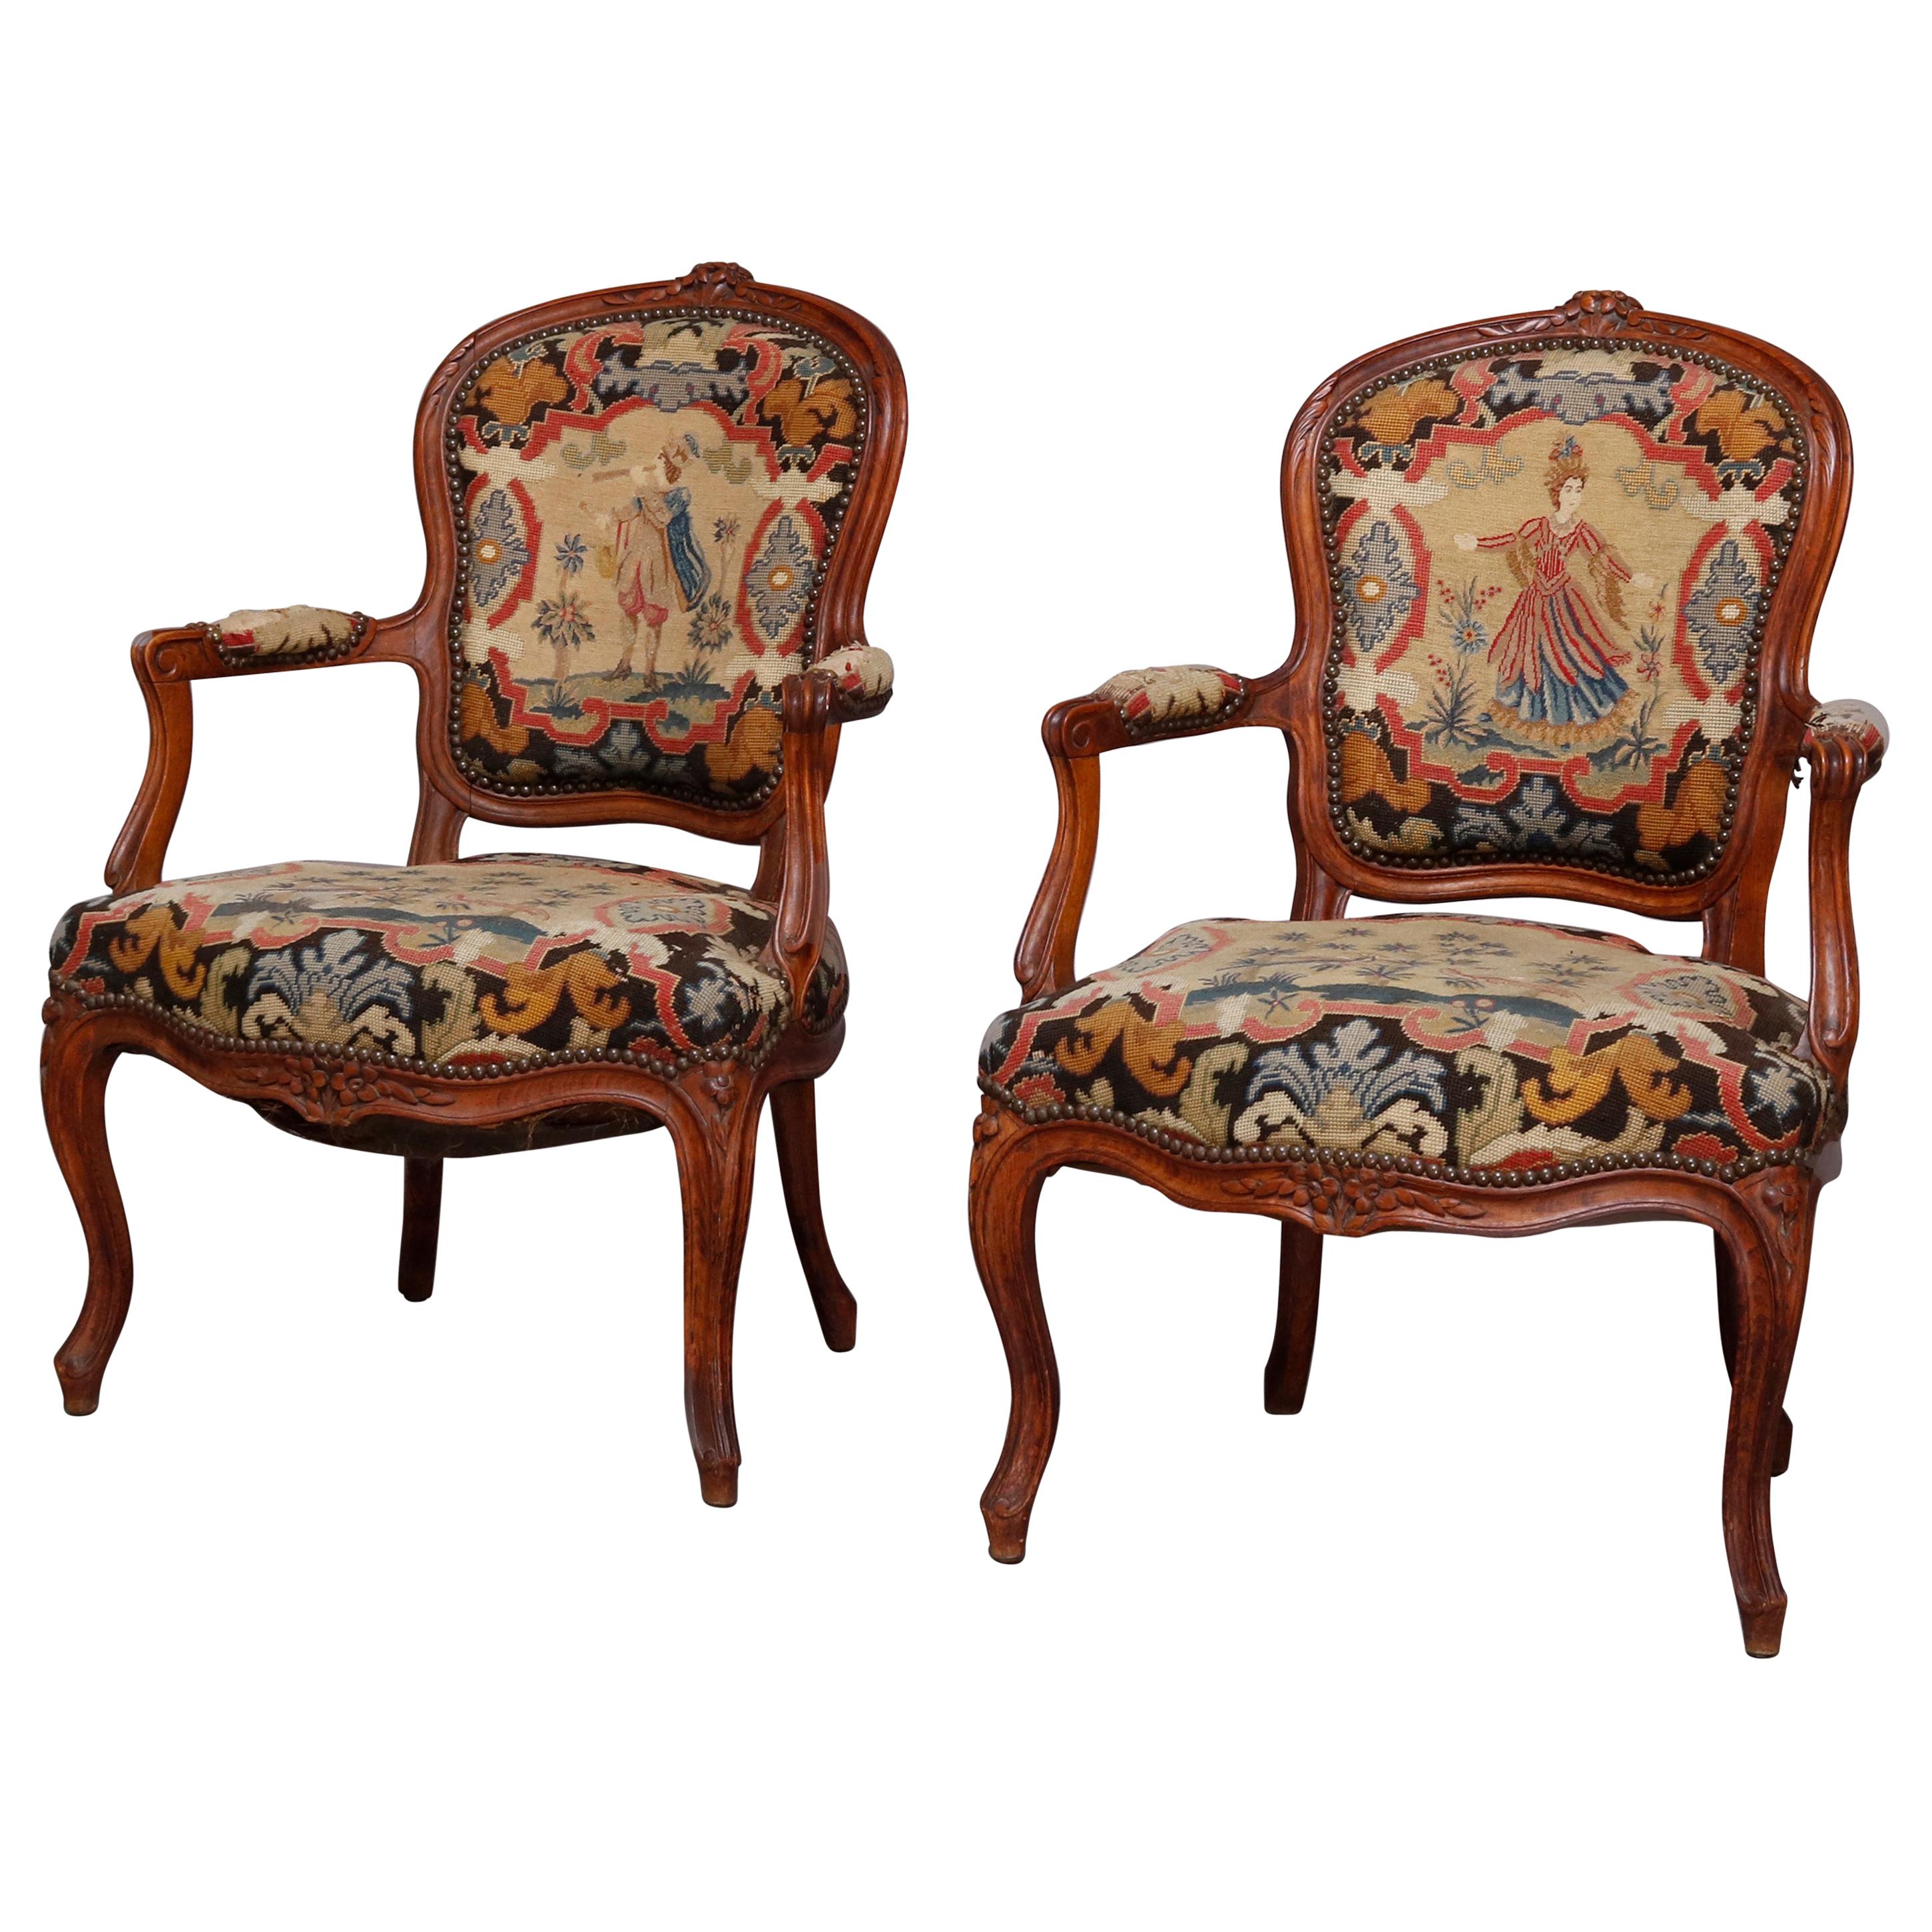 French Louis XV Carved Fruitwood & Pictorial Needlepoint Fauteuils, circa 1790